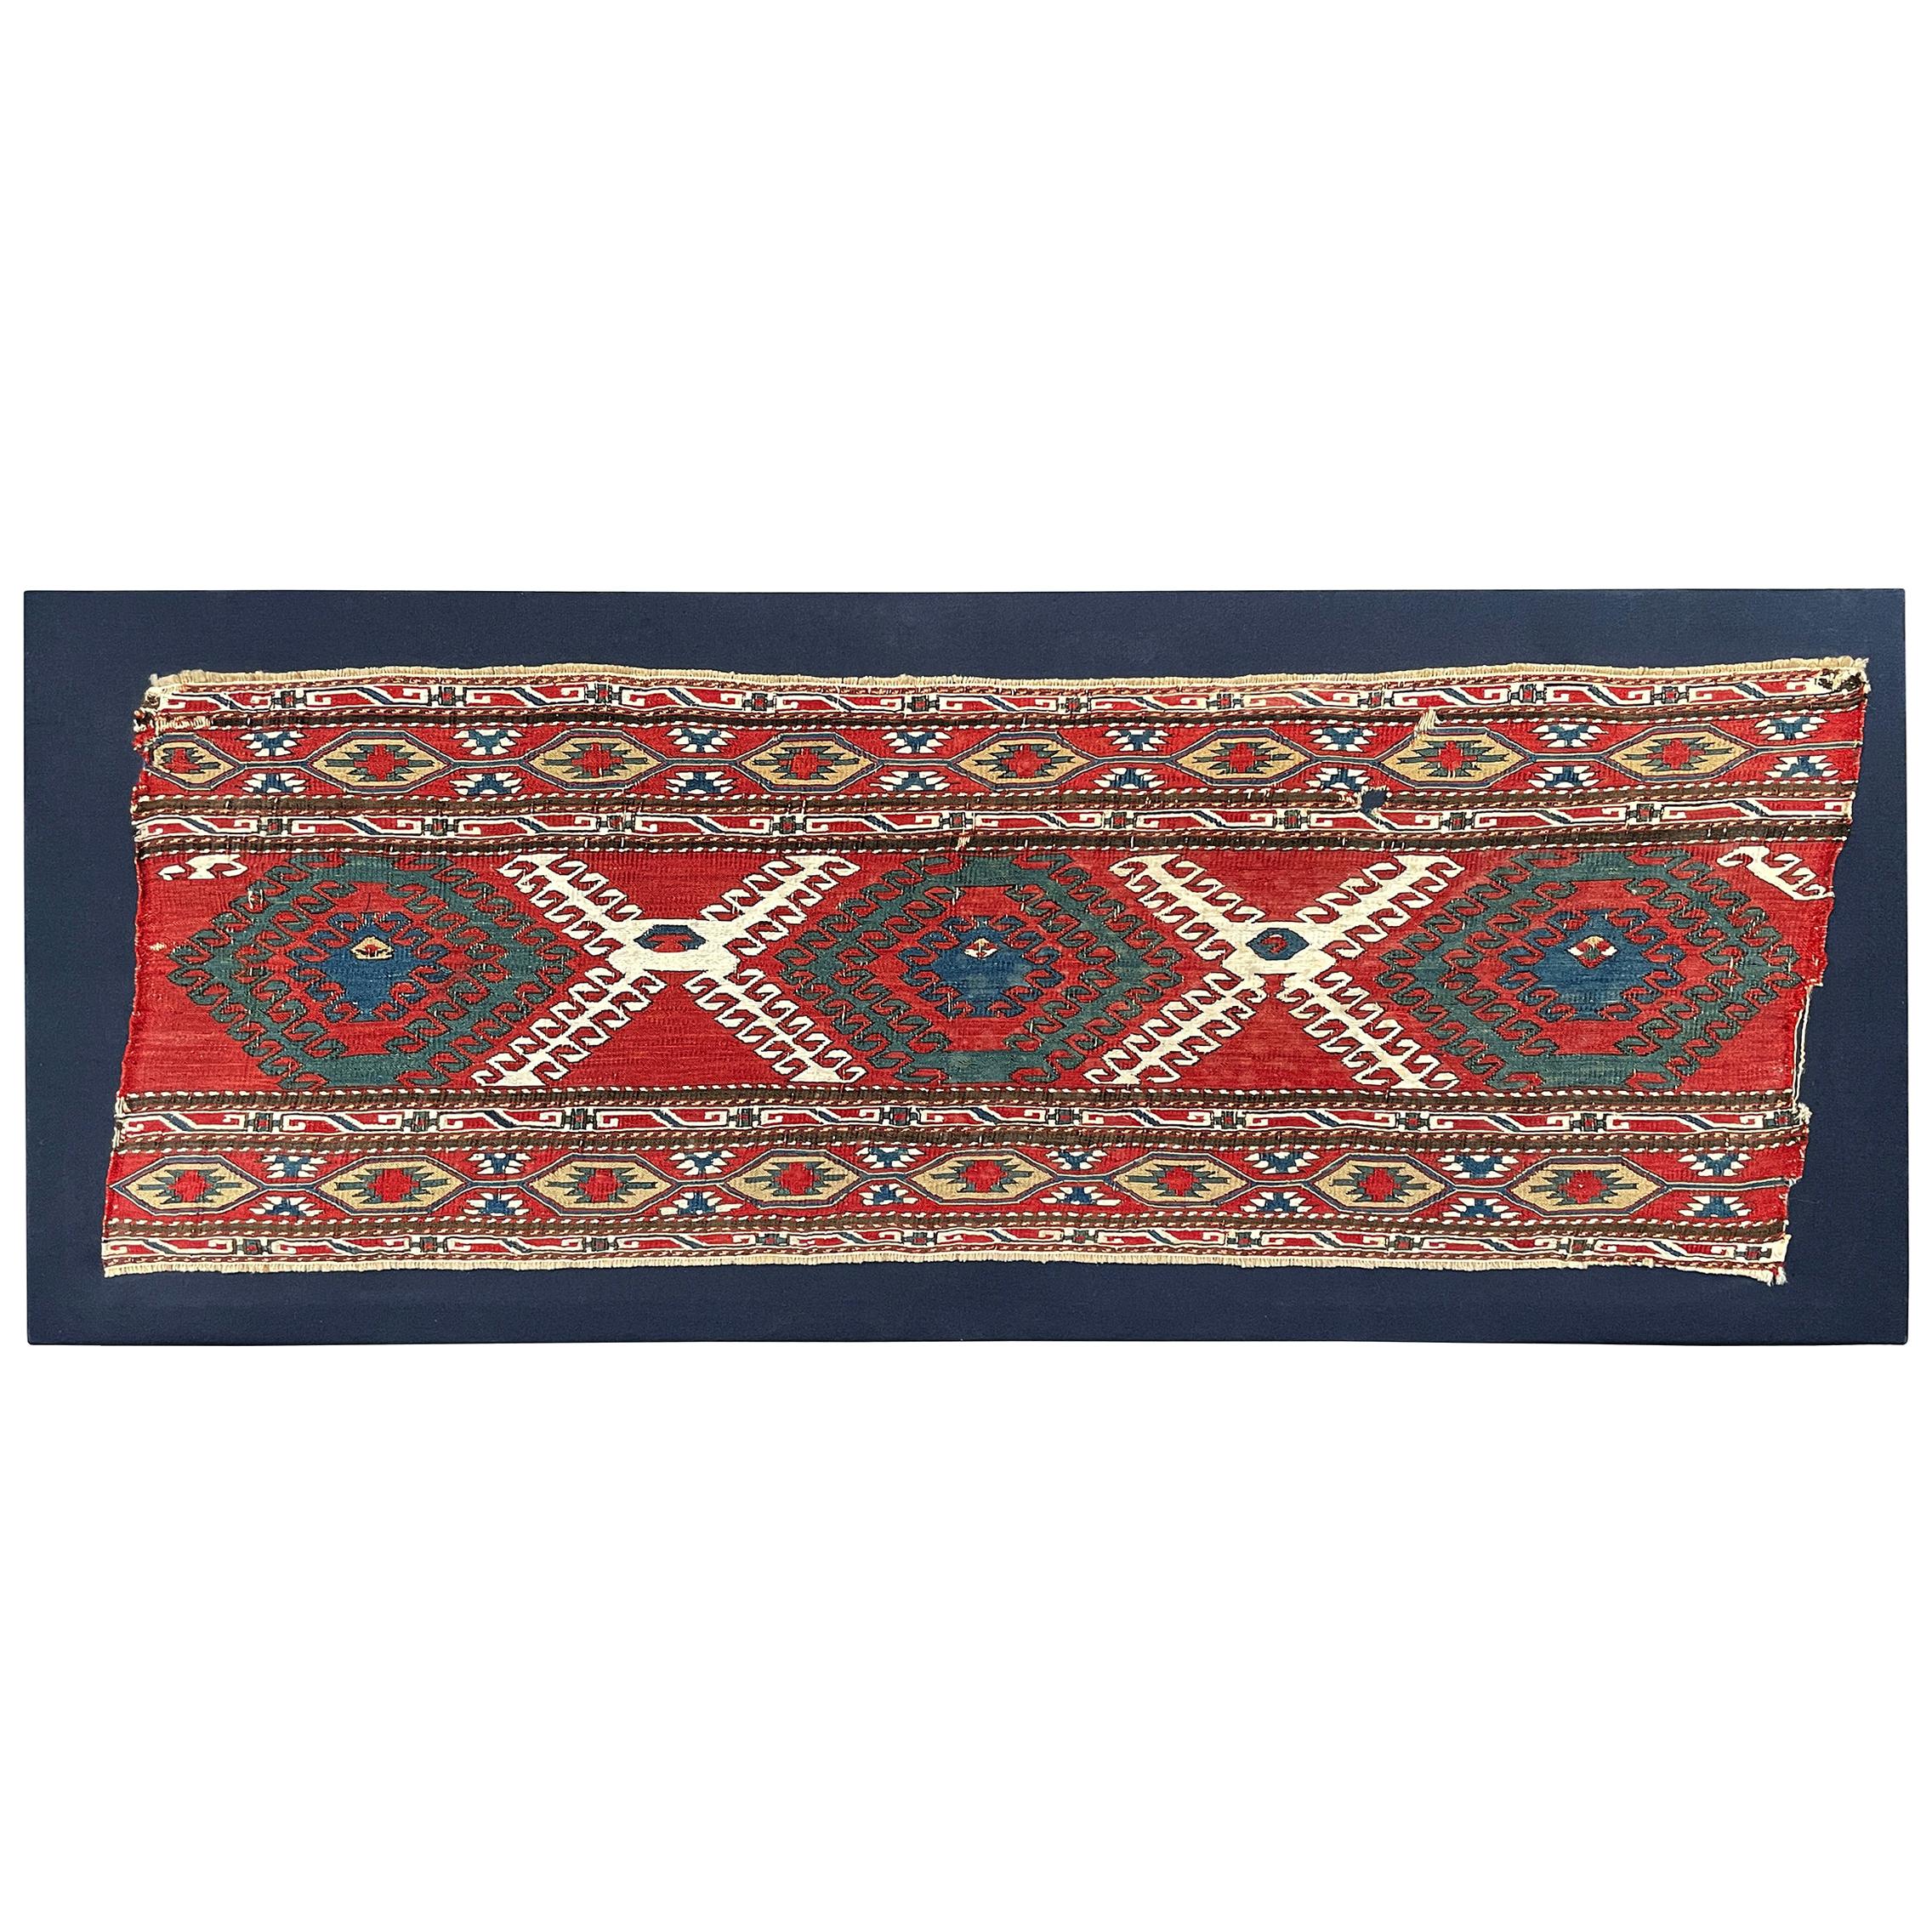 Mounted Early 20th Century Soumak Rug Fragment For Sale